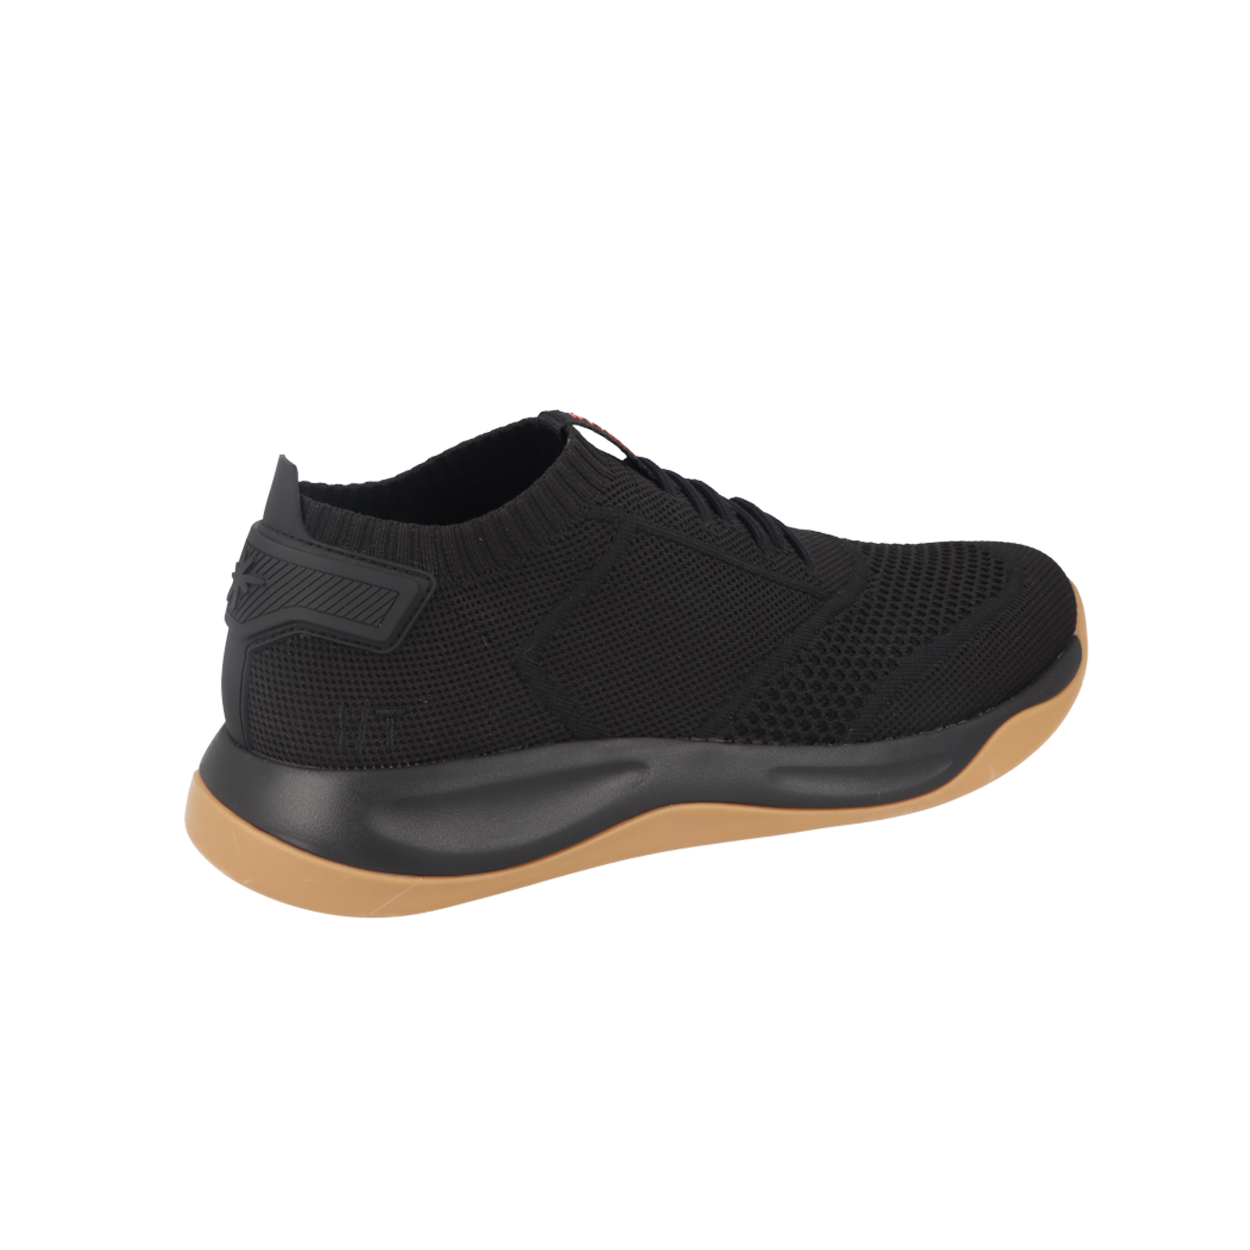 IF/THEN the Callisto men sneaker in Pitch Black back